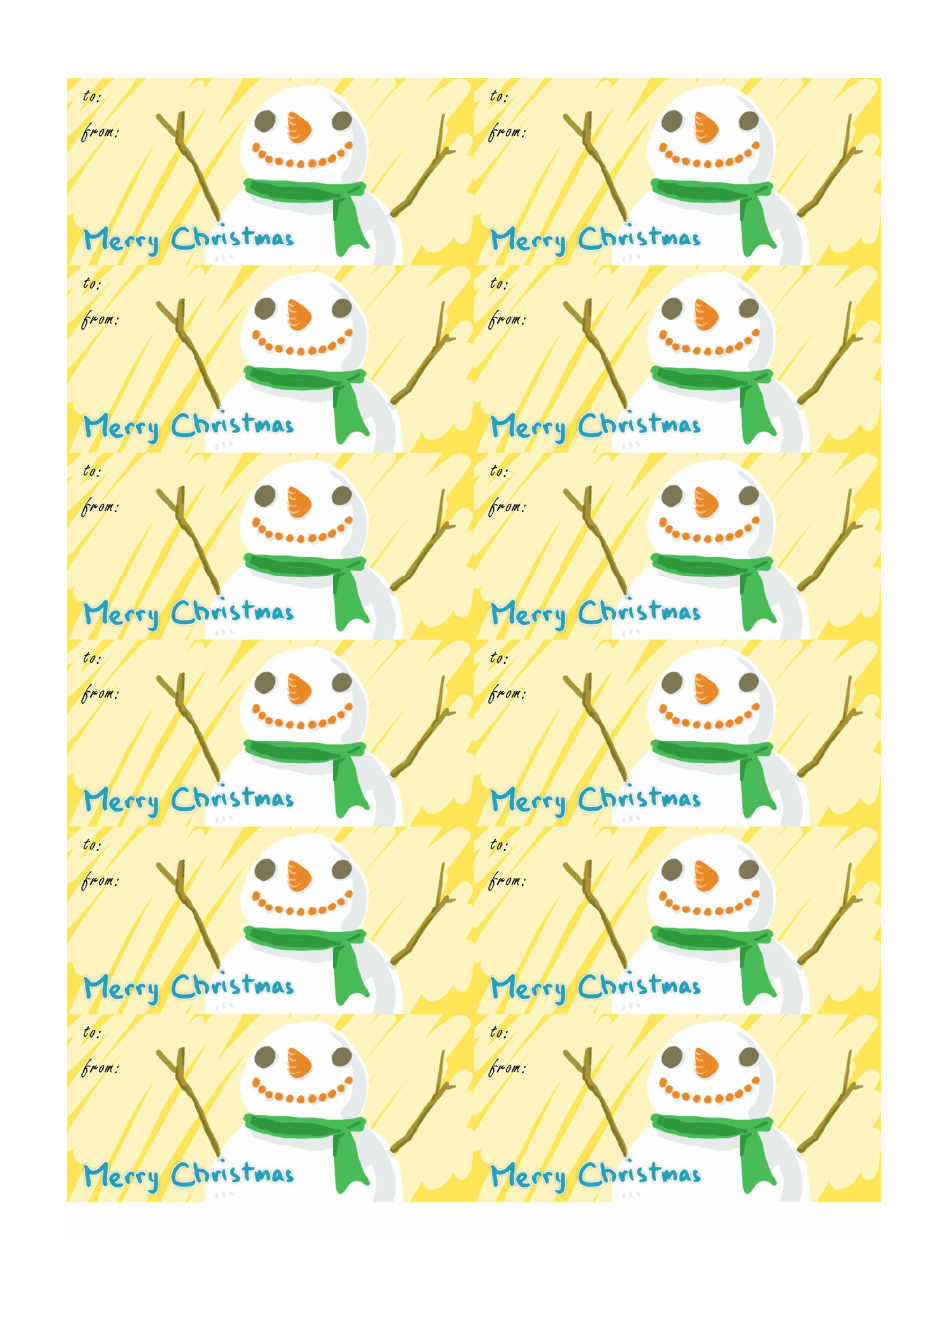 Merry Christmas gift tag template